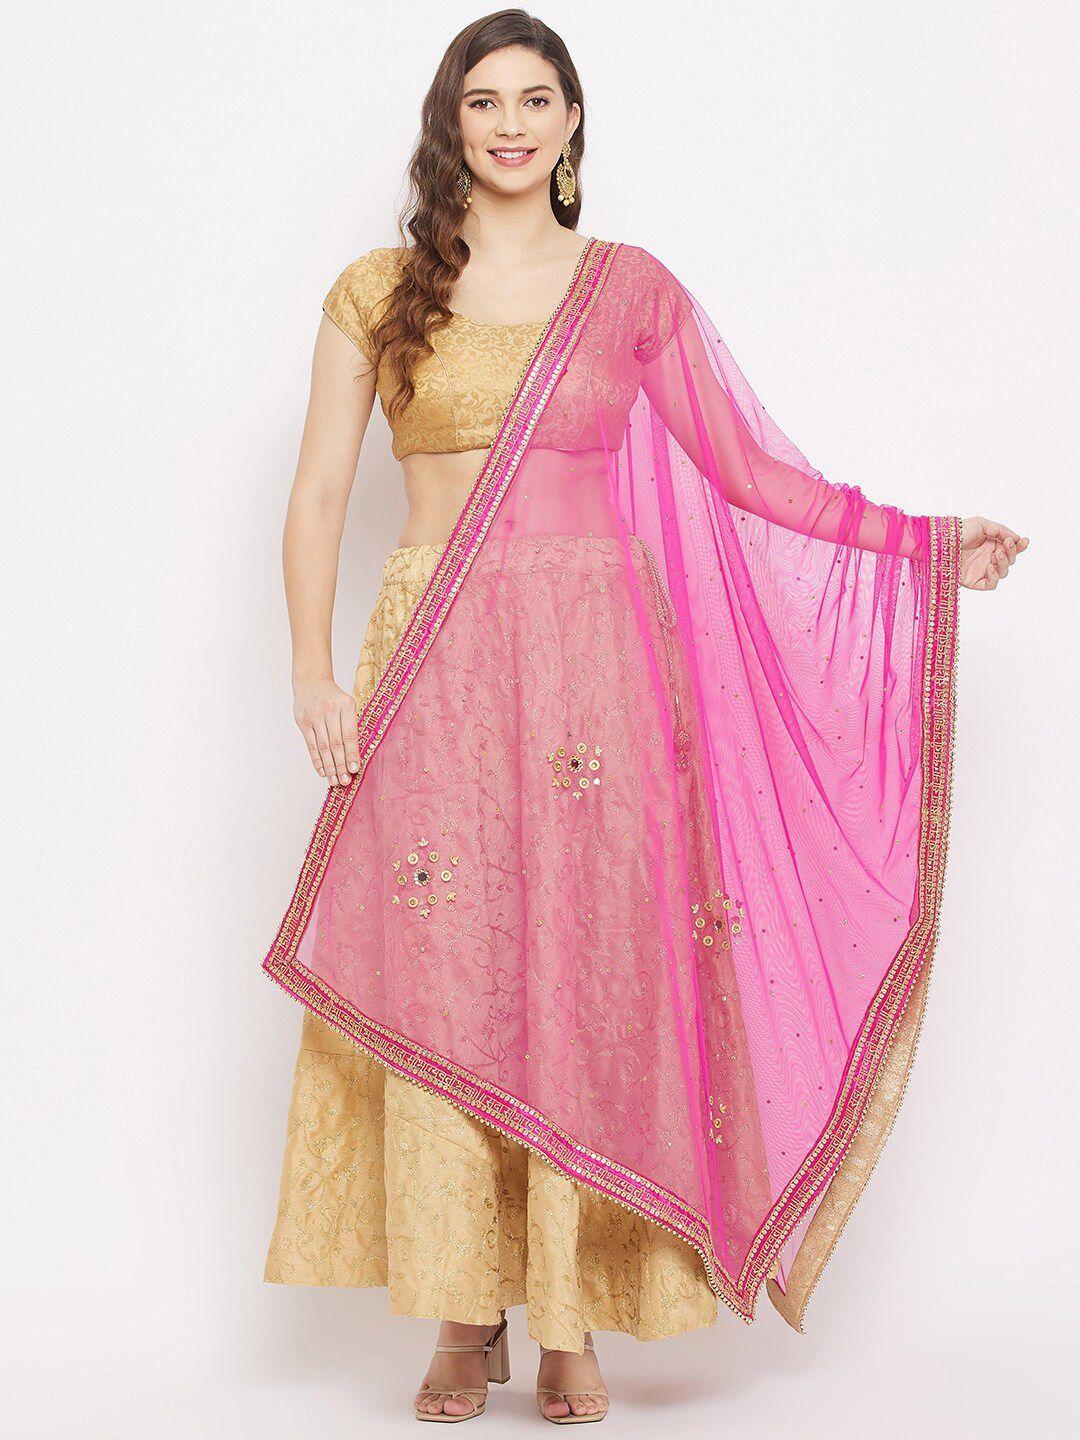 clora-creation-magenta-&-gold-toned-embroidered-net-dupatta-with-beads-&-stones